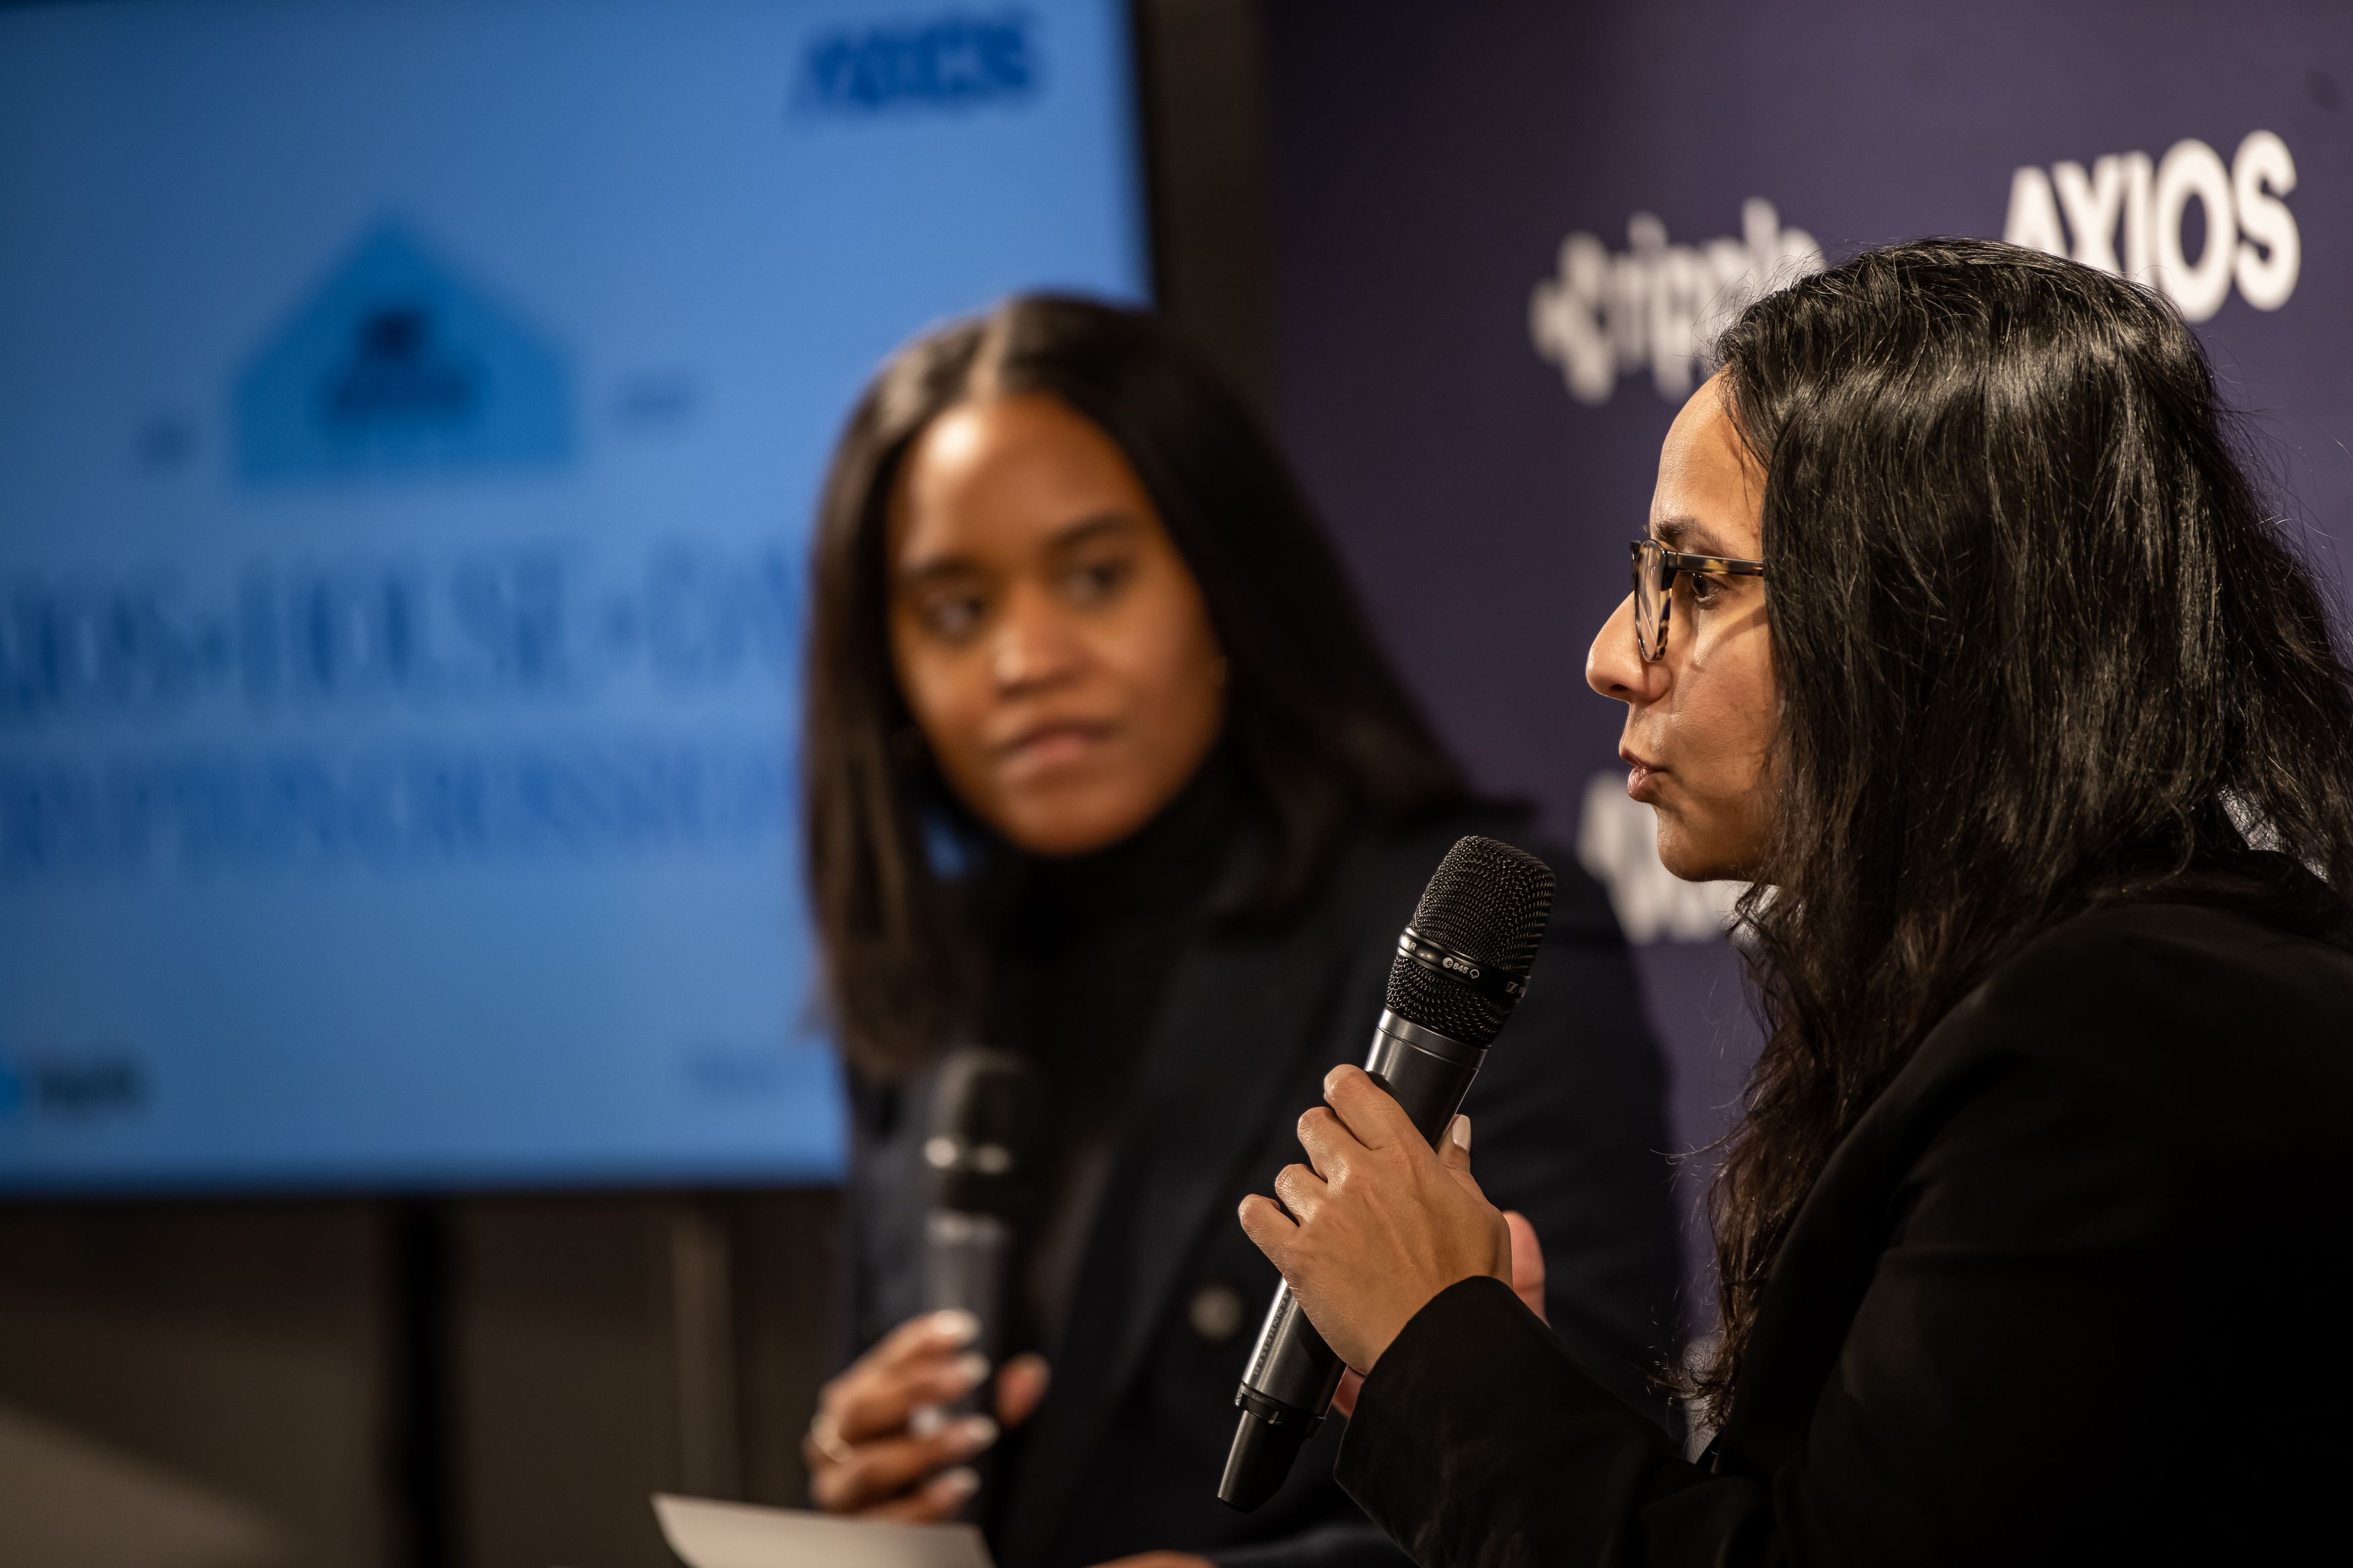 Neha Narula speaking to the audience alongside Axios’ Courtenay Brown.